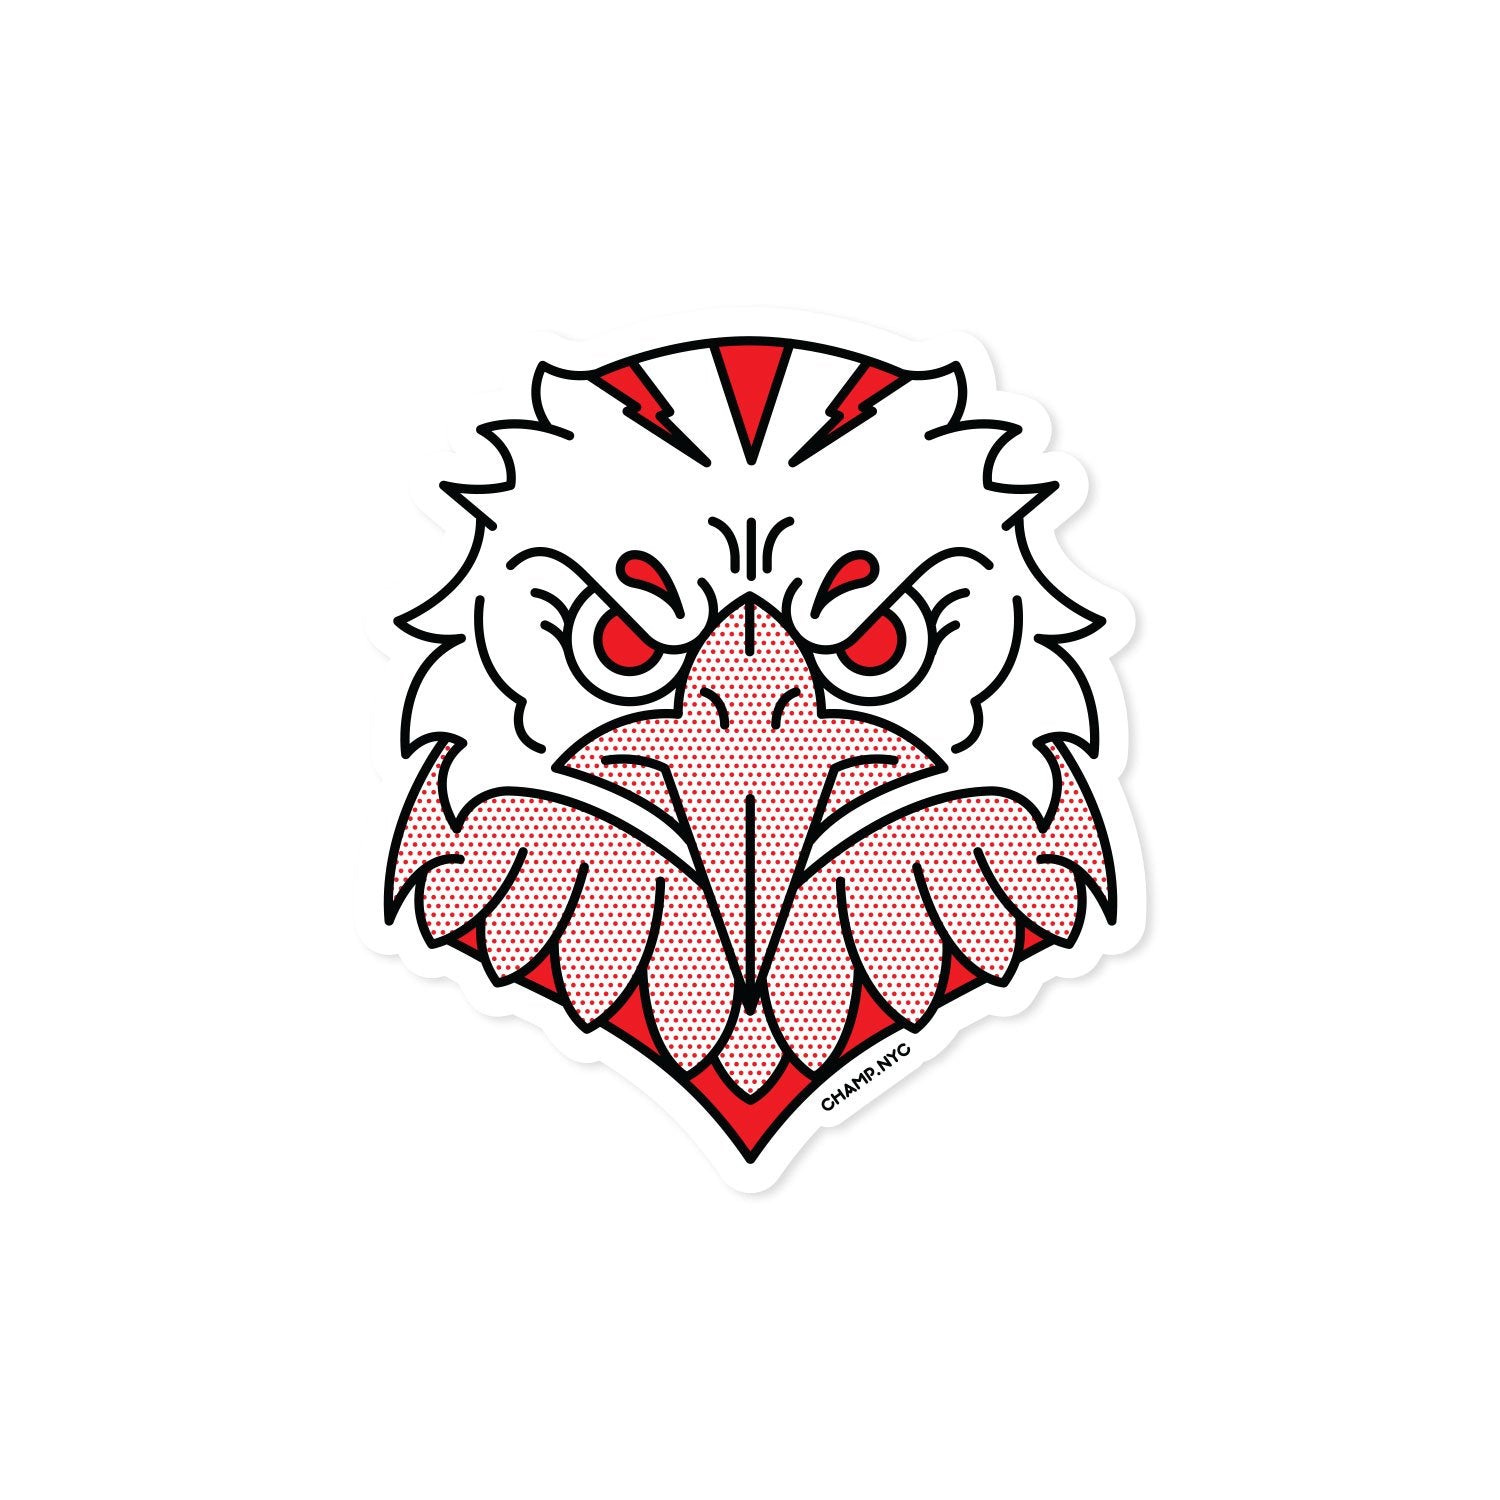 A 3x3" vinyl art sticker of an eagle head drawn in a flash tattoo and pop art fusion style in a red, white and black color palette by the artist, Red Halftone.